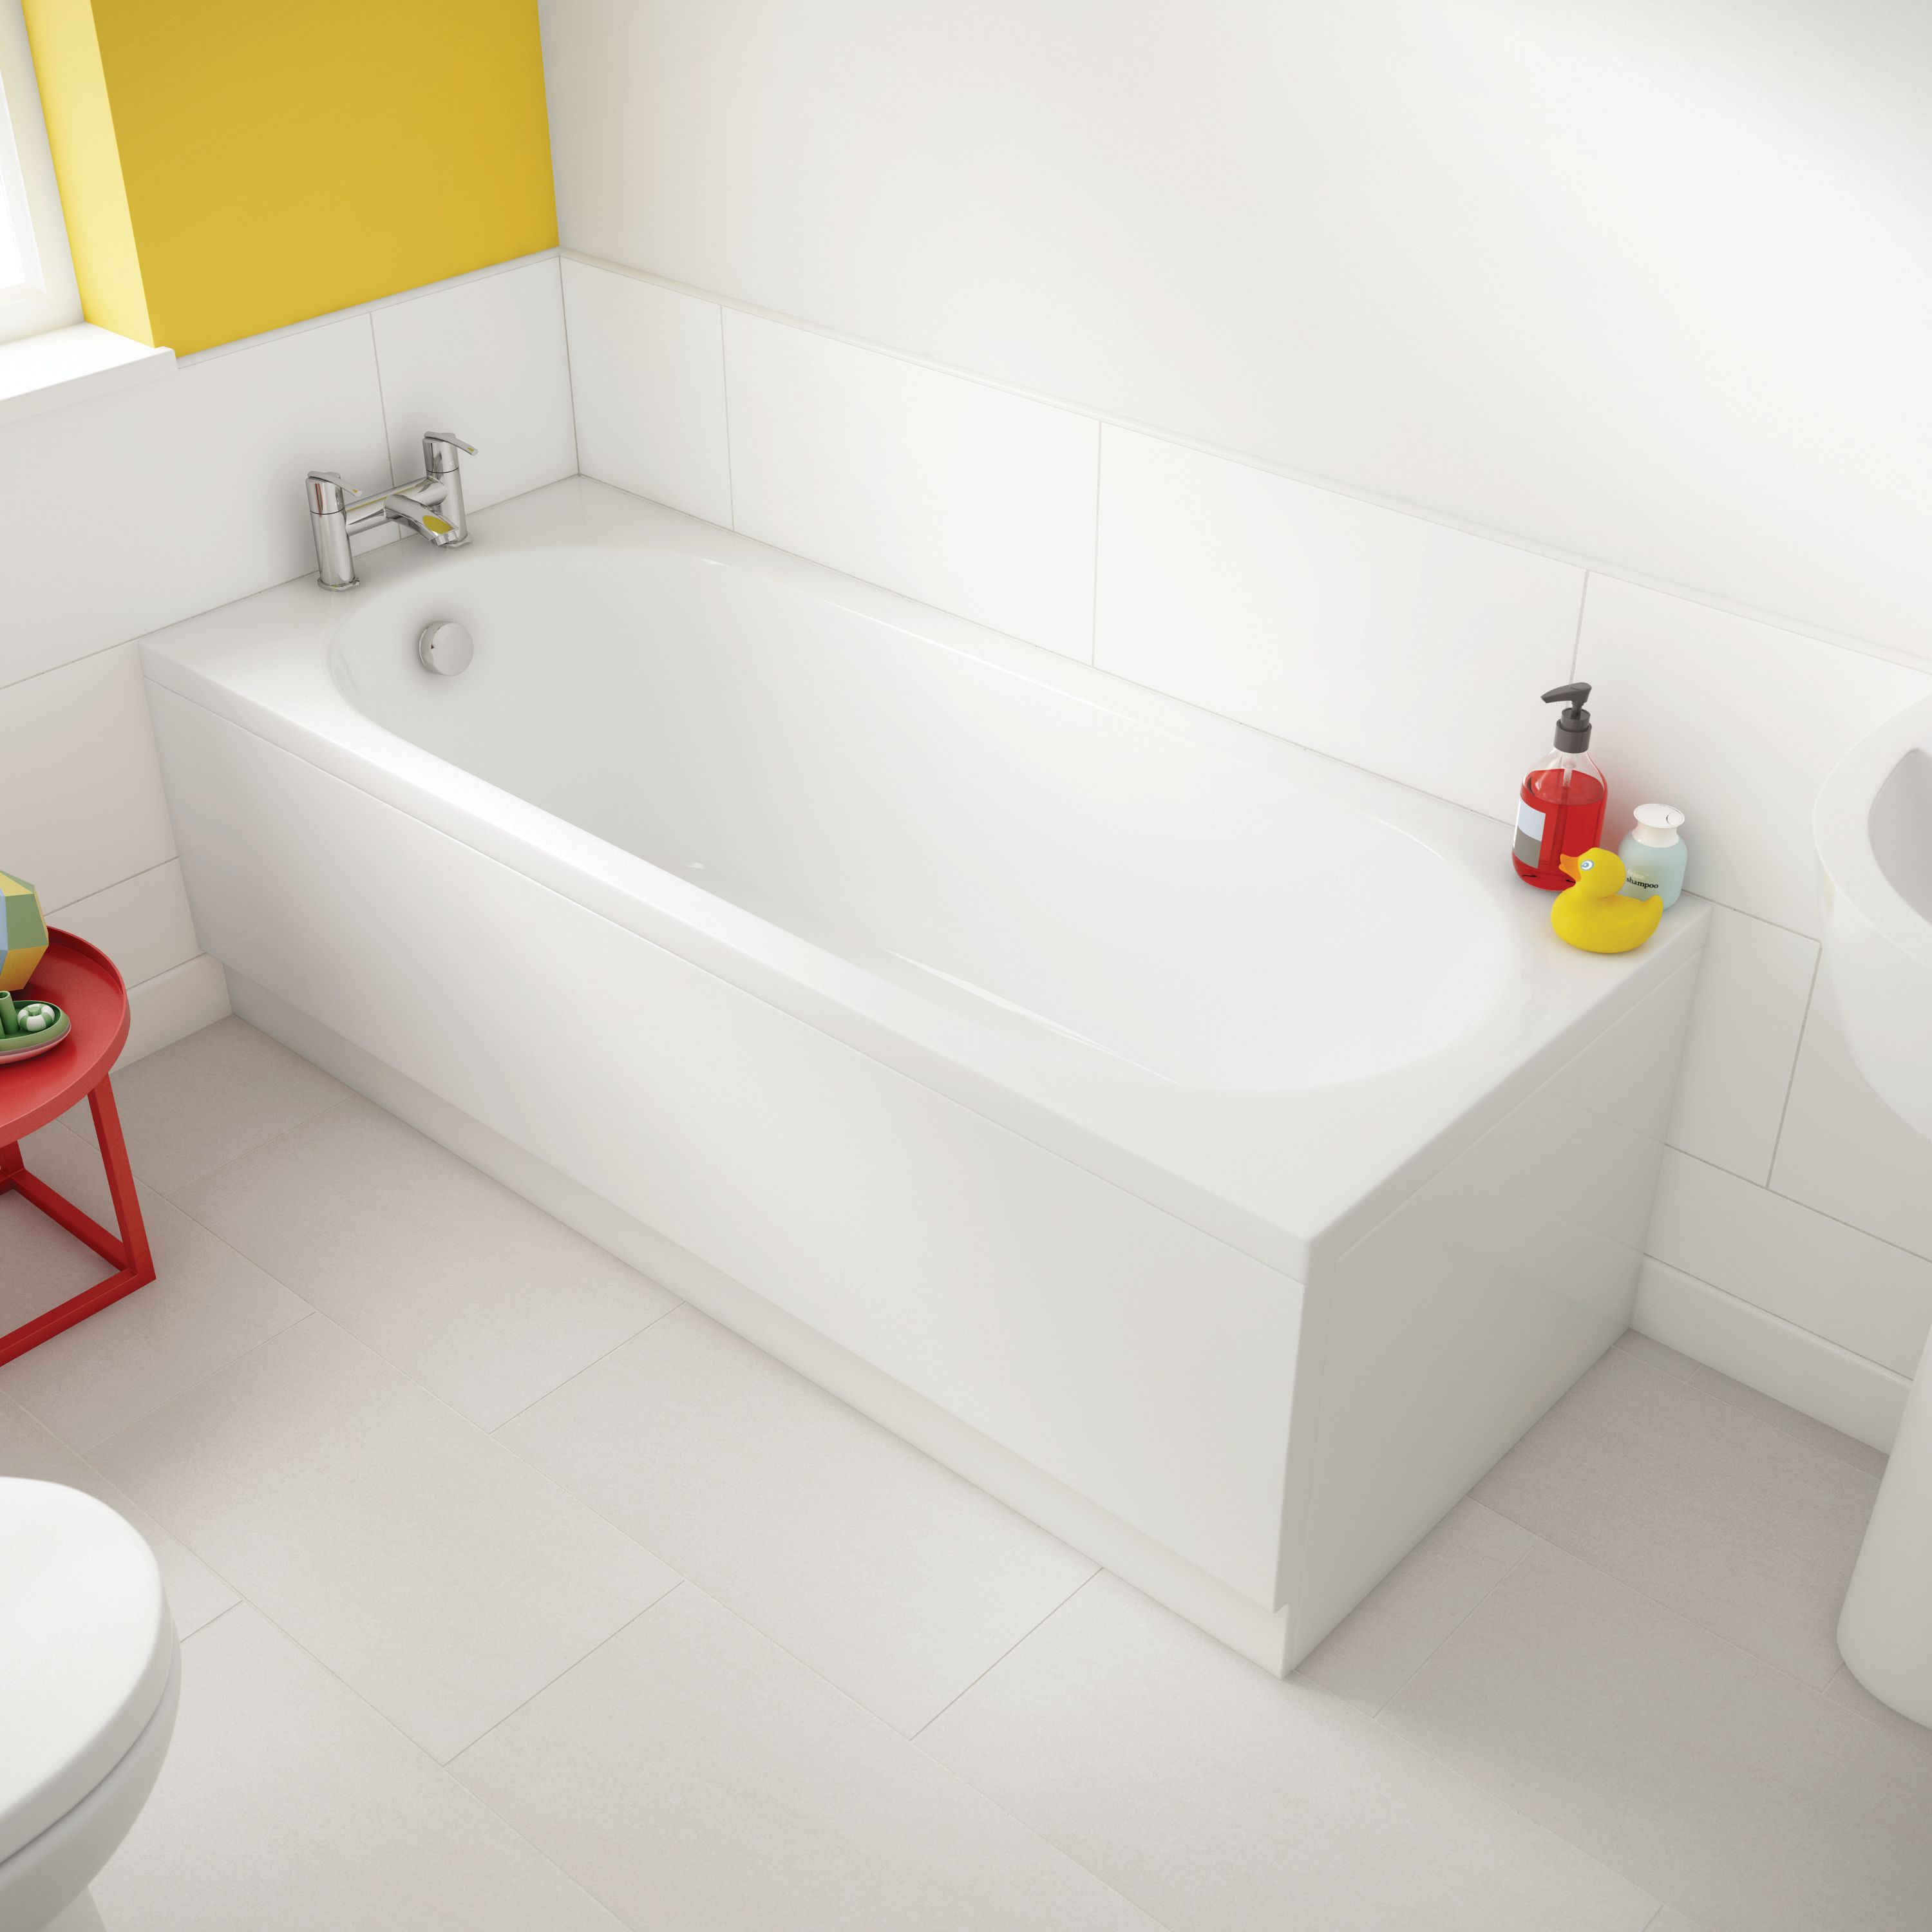 Image of Wickes Forenza Straight Bath - 1800 x 400mm